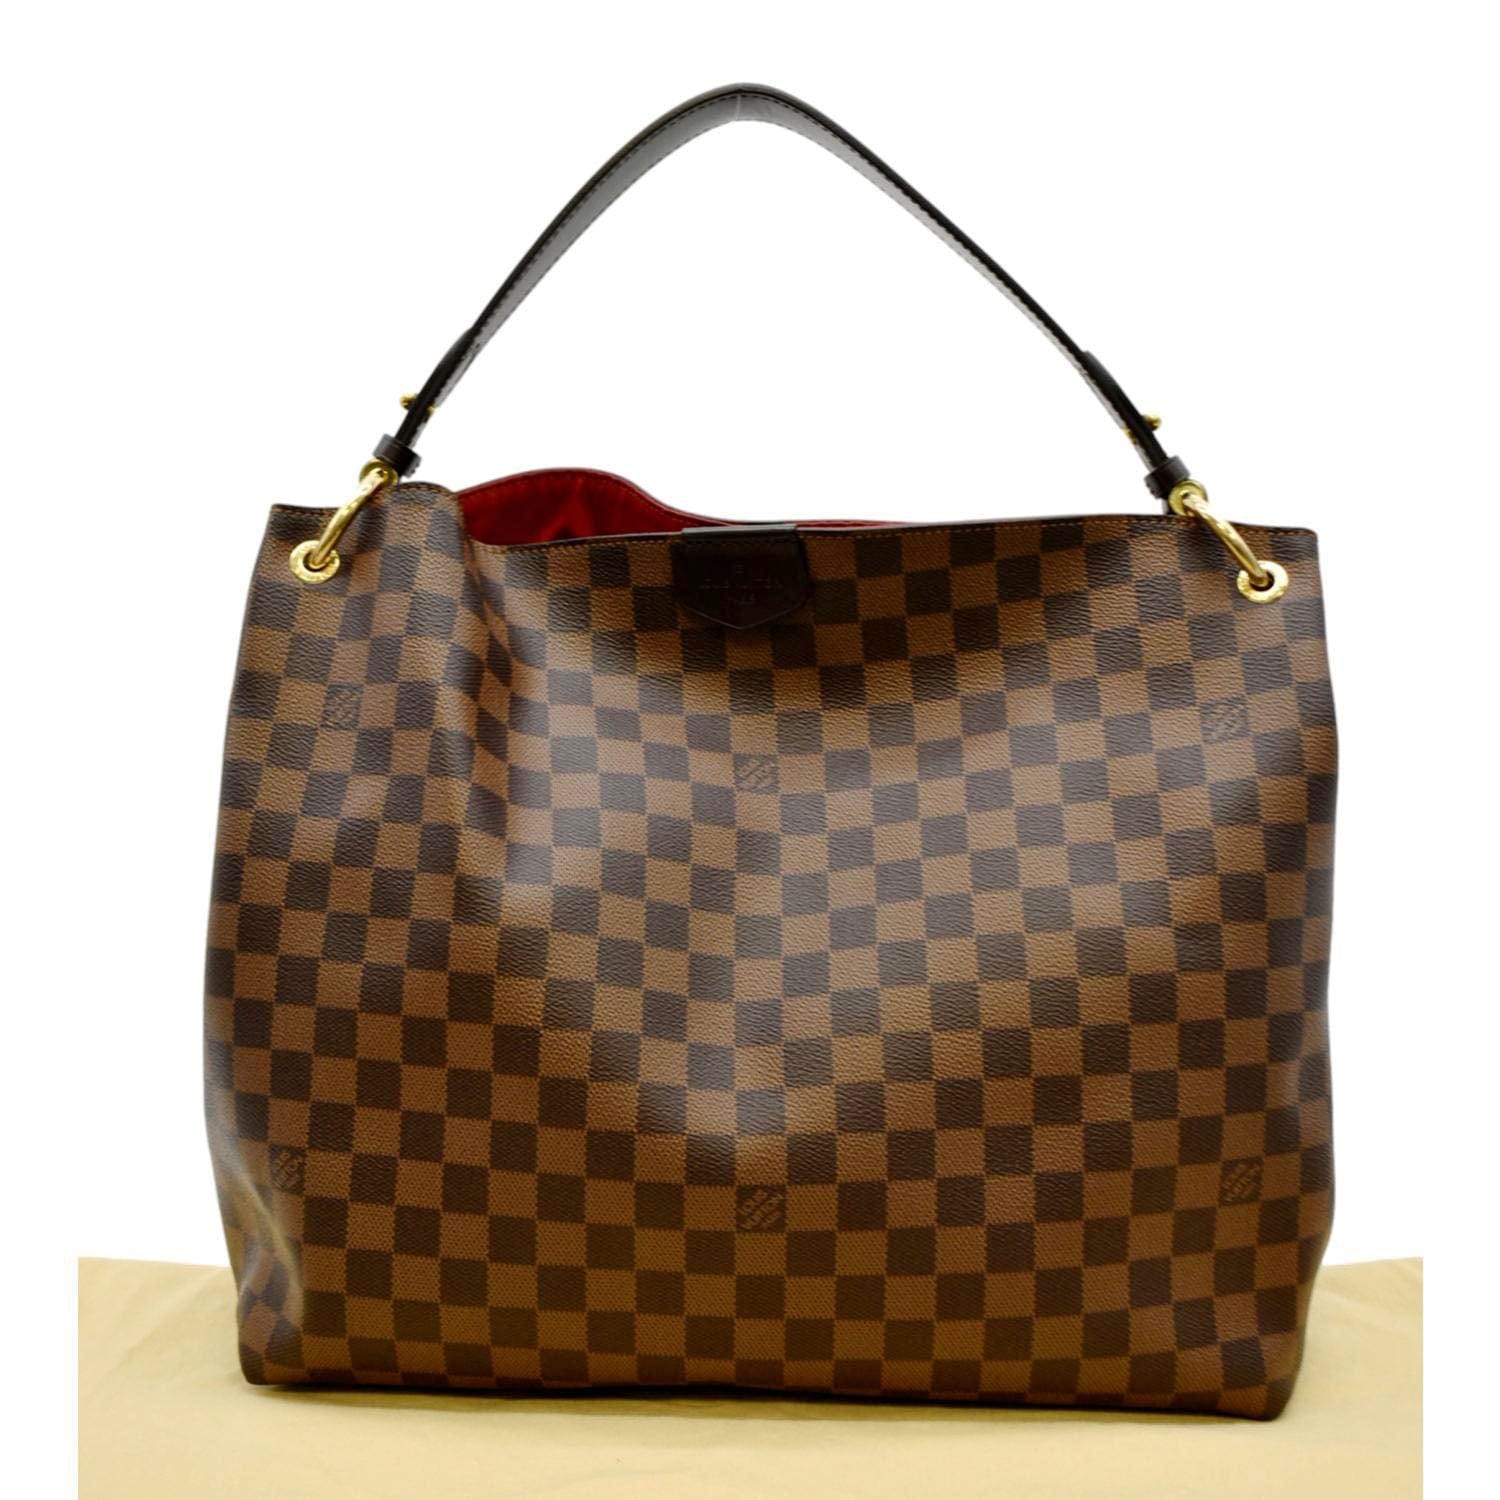 LOUIS VUITTON Official USA Website - Discover our latest Graceful